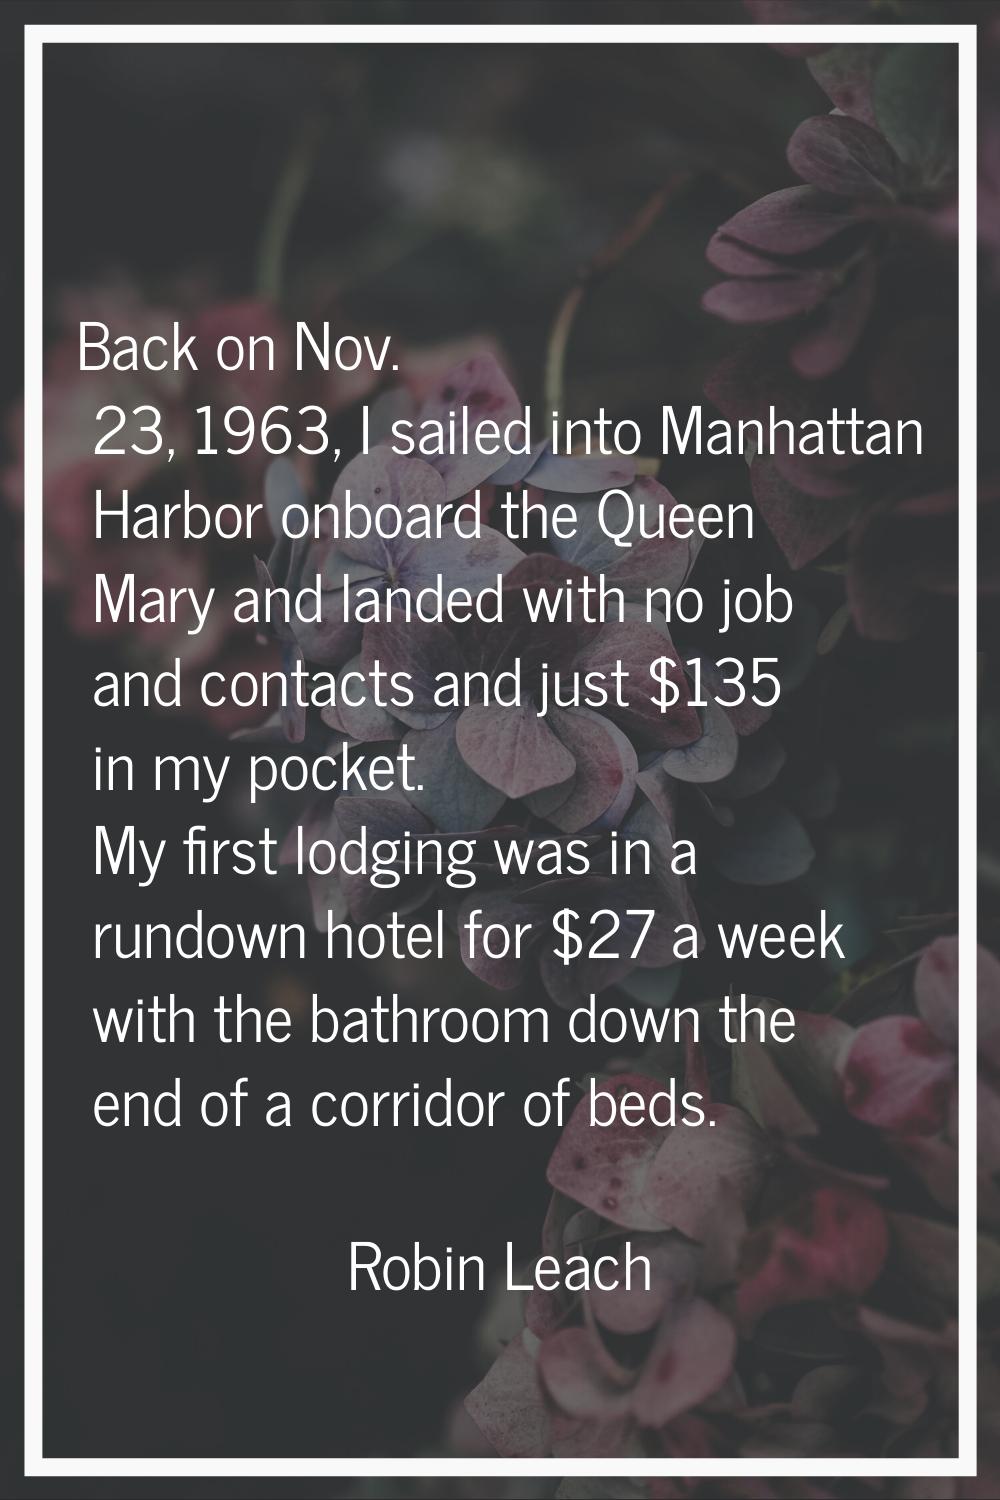 Back on Nov. 23, 1963, I sailed into Manhattan Harbor onboard the Queen Mary and landed with no job